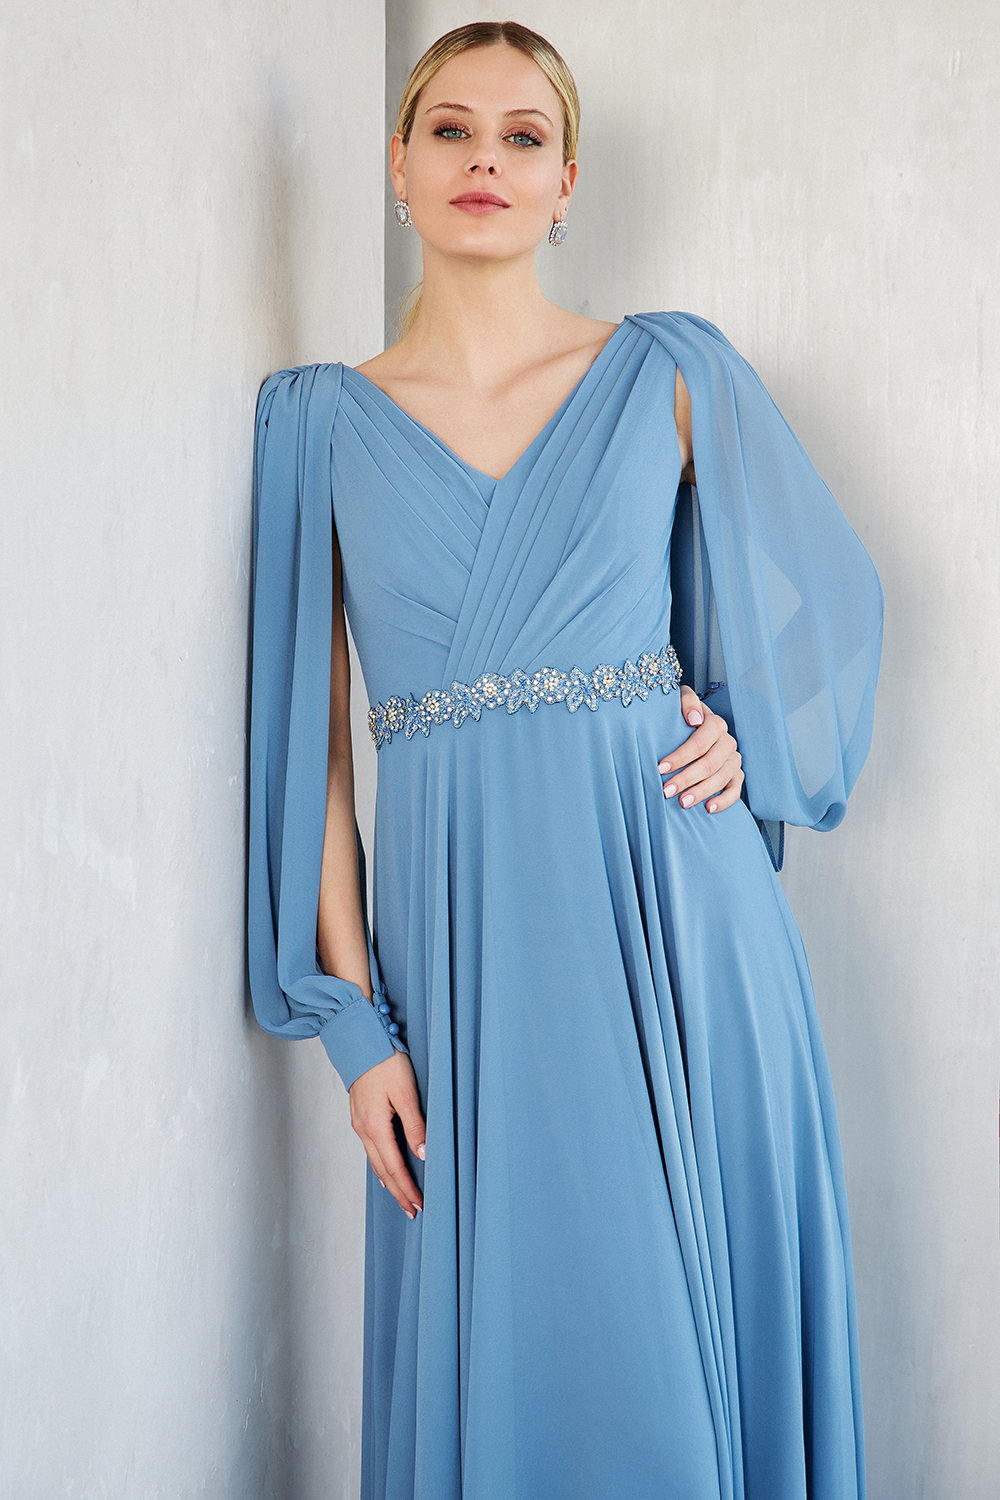 Classic Dresses / Long evening chiffon dress with beading at the waist and long sleeves